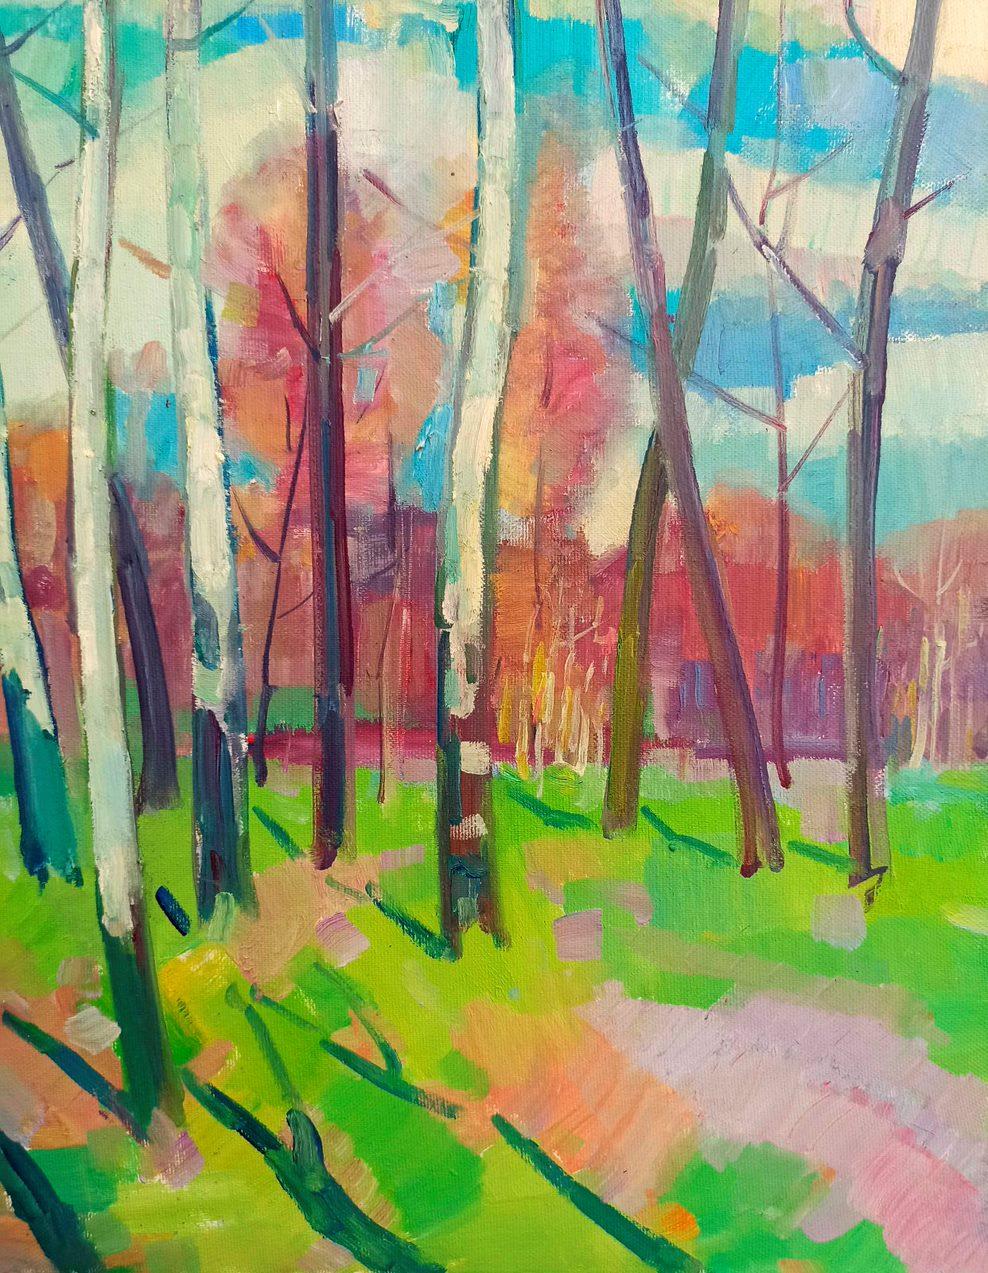 Artist: Peter Tovpev
Work: Original oil painting, handmade artwork, one of a kind 
Medium: Oil on Canvas 
Year: 2023
Style: Post Impressionism
Title: Birches Grove
Size: 31.5